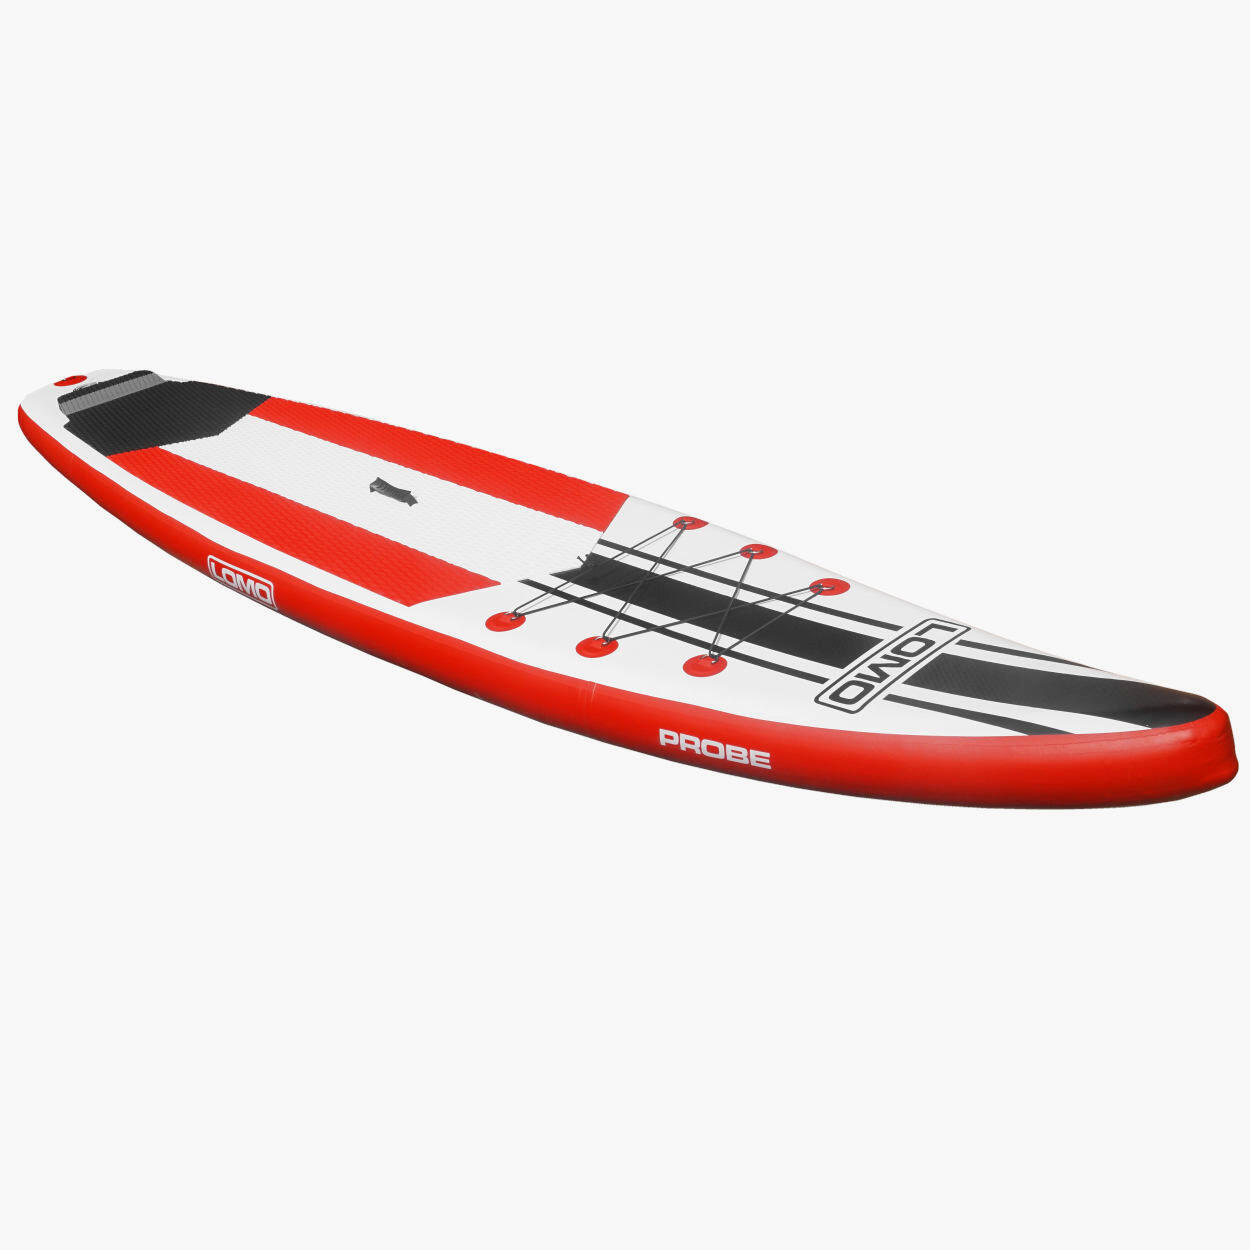 Lomo Probe Inflatable Stand Up Paddle Board ISUP 12' 3/8